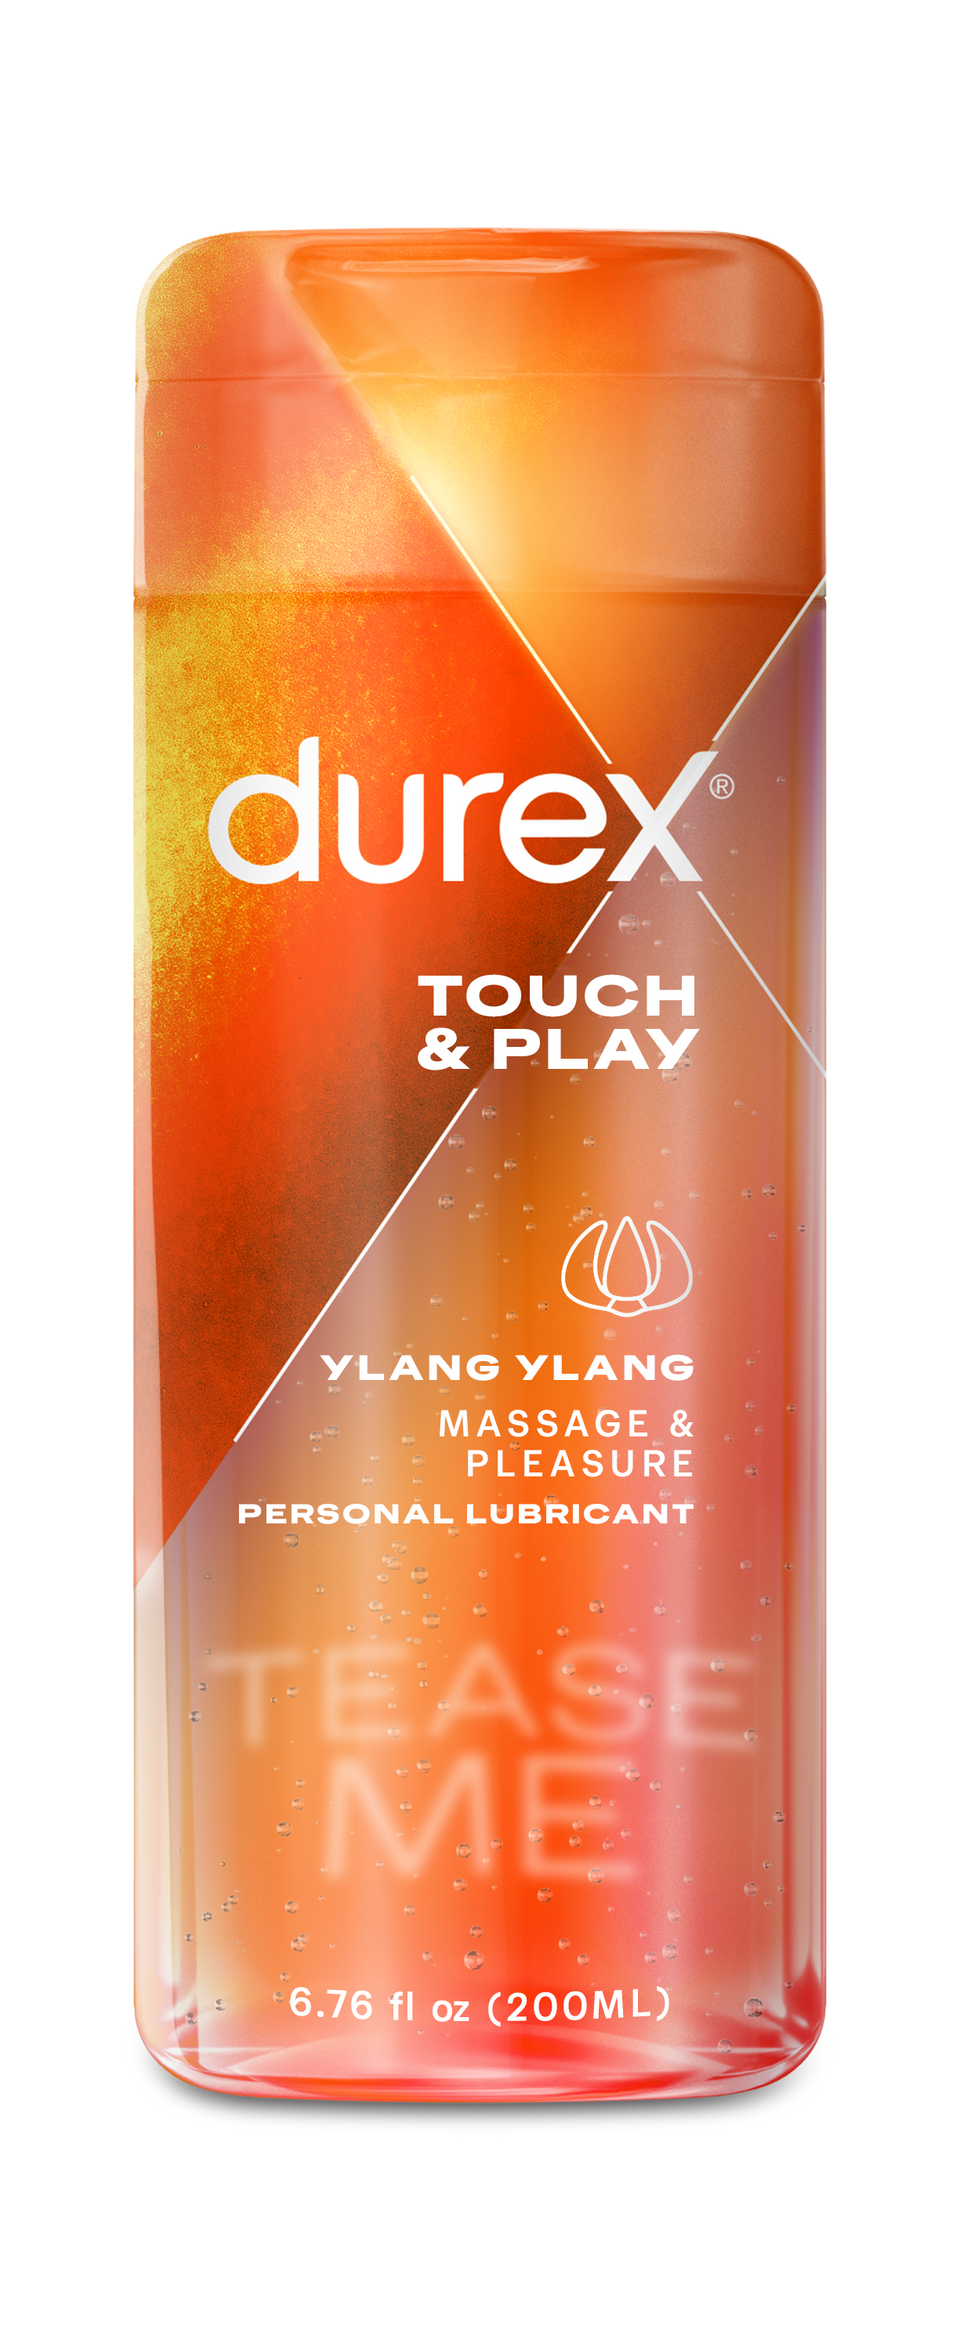 Durex Massage & Play 2 in 1 Lubricant, 6.76 oz, Sensual with Ylang Ylang - Front Image